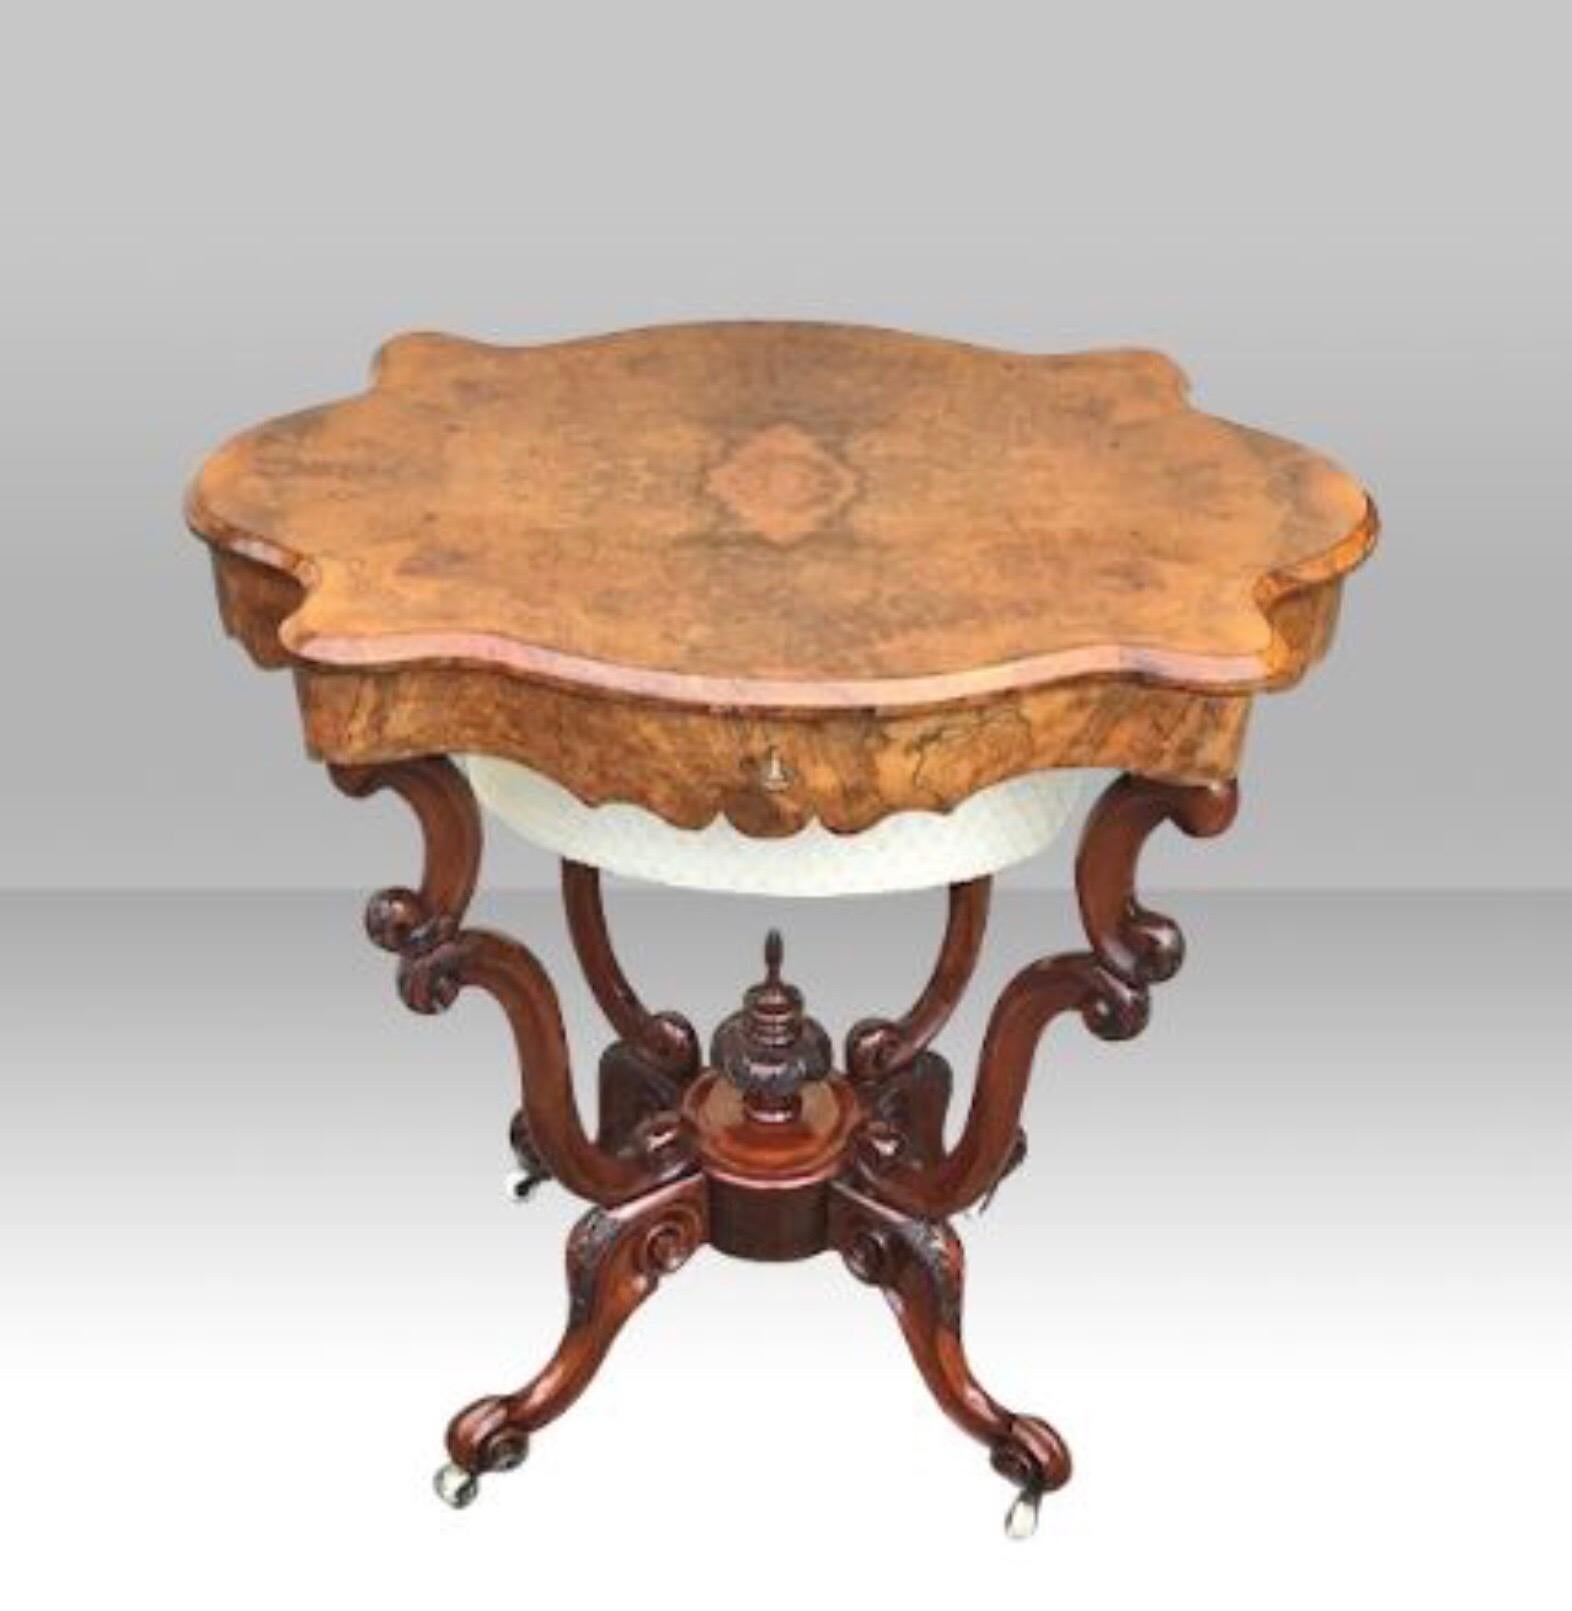 Magnificent Antique Burr Walnut Cradle Base
Victorian Sewing Work Lamp Table On Cradle Base.
Working Lock and Key.
Circa 1860
28ins x 27ins x 18ins
71cm x 68.5cm x 45.5cm